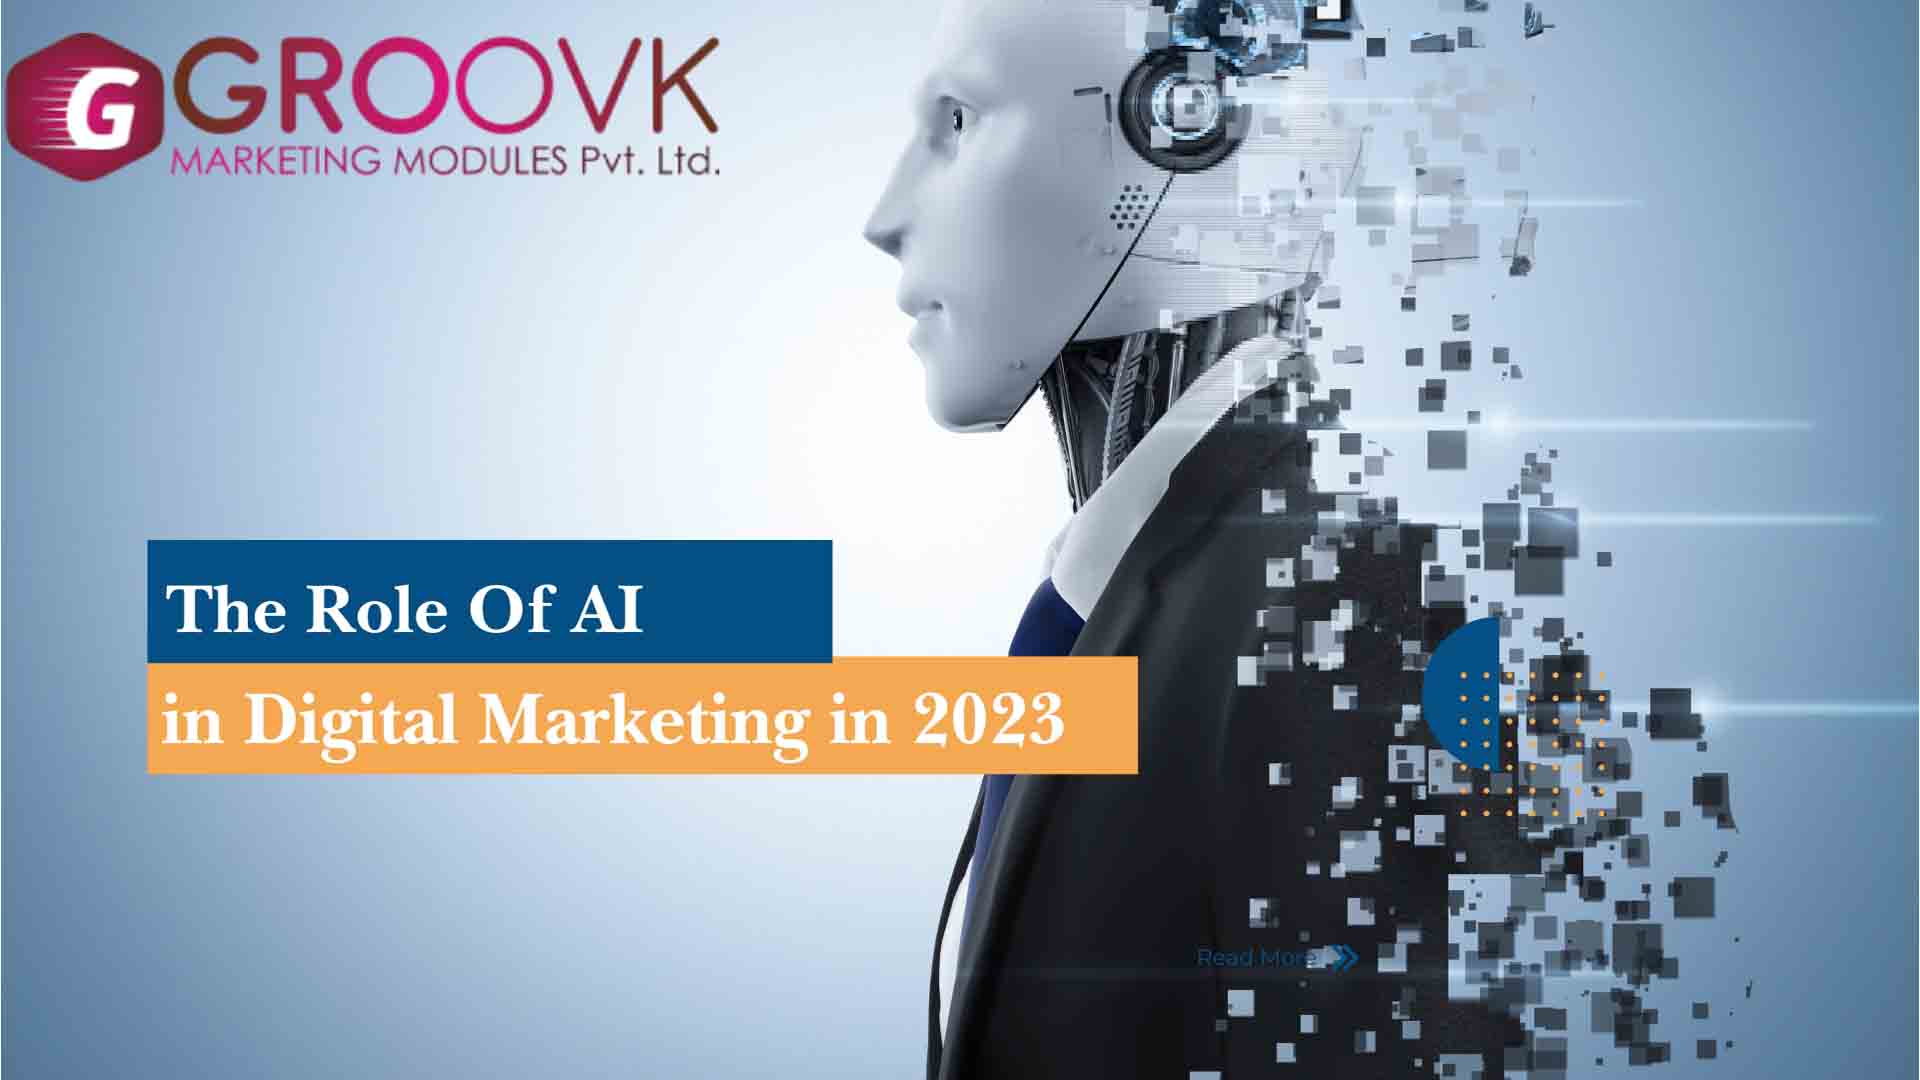 The Role of AI in Digital Marketing in 2023